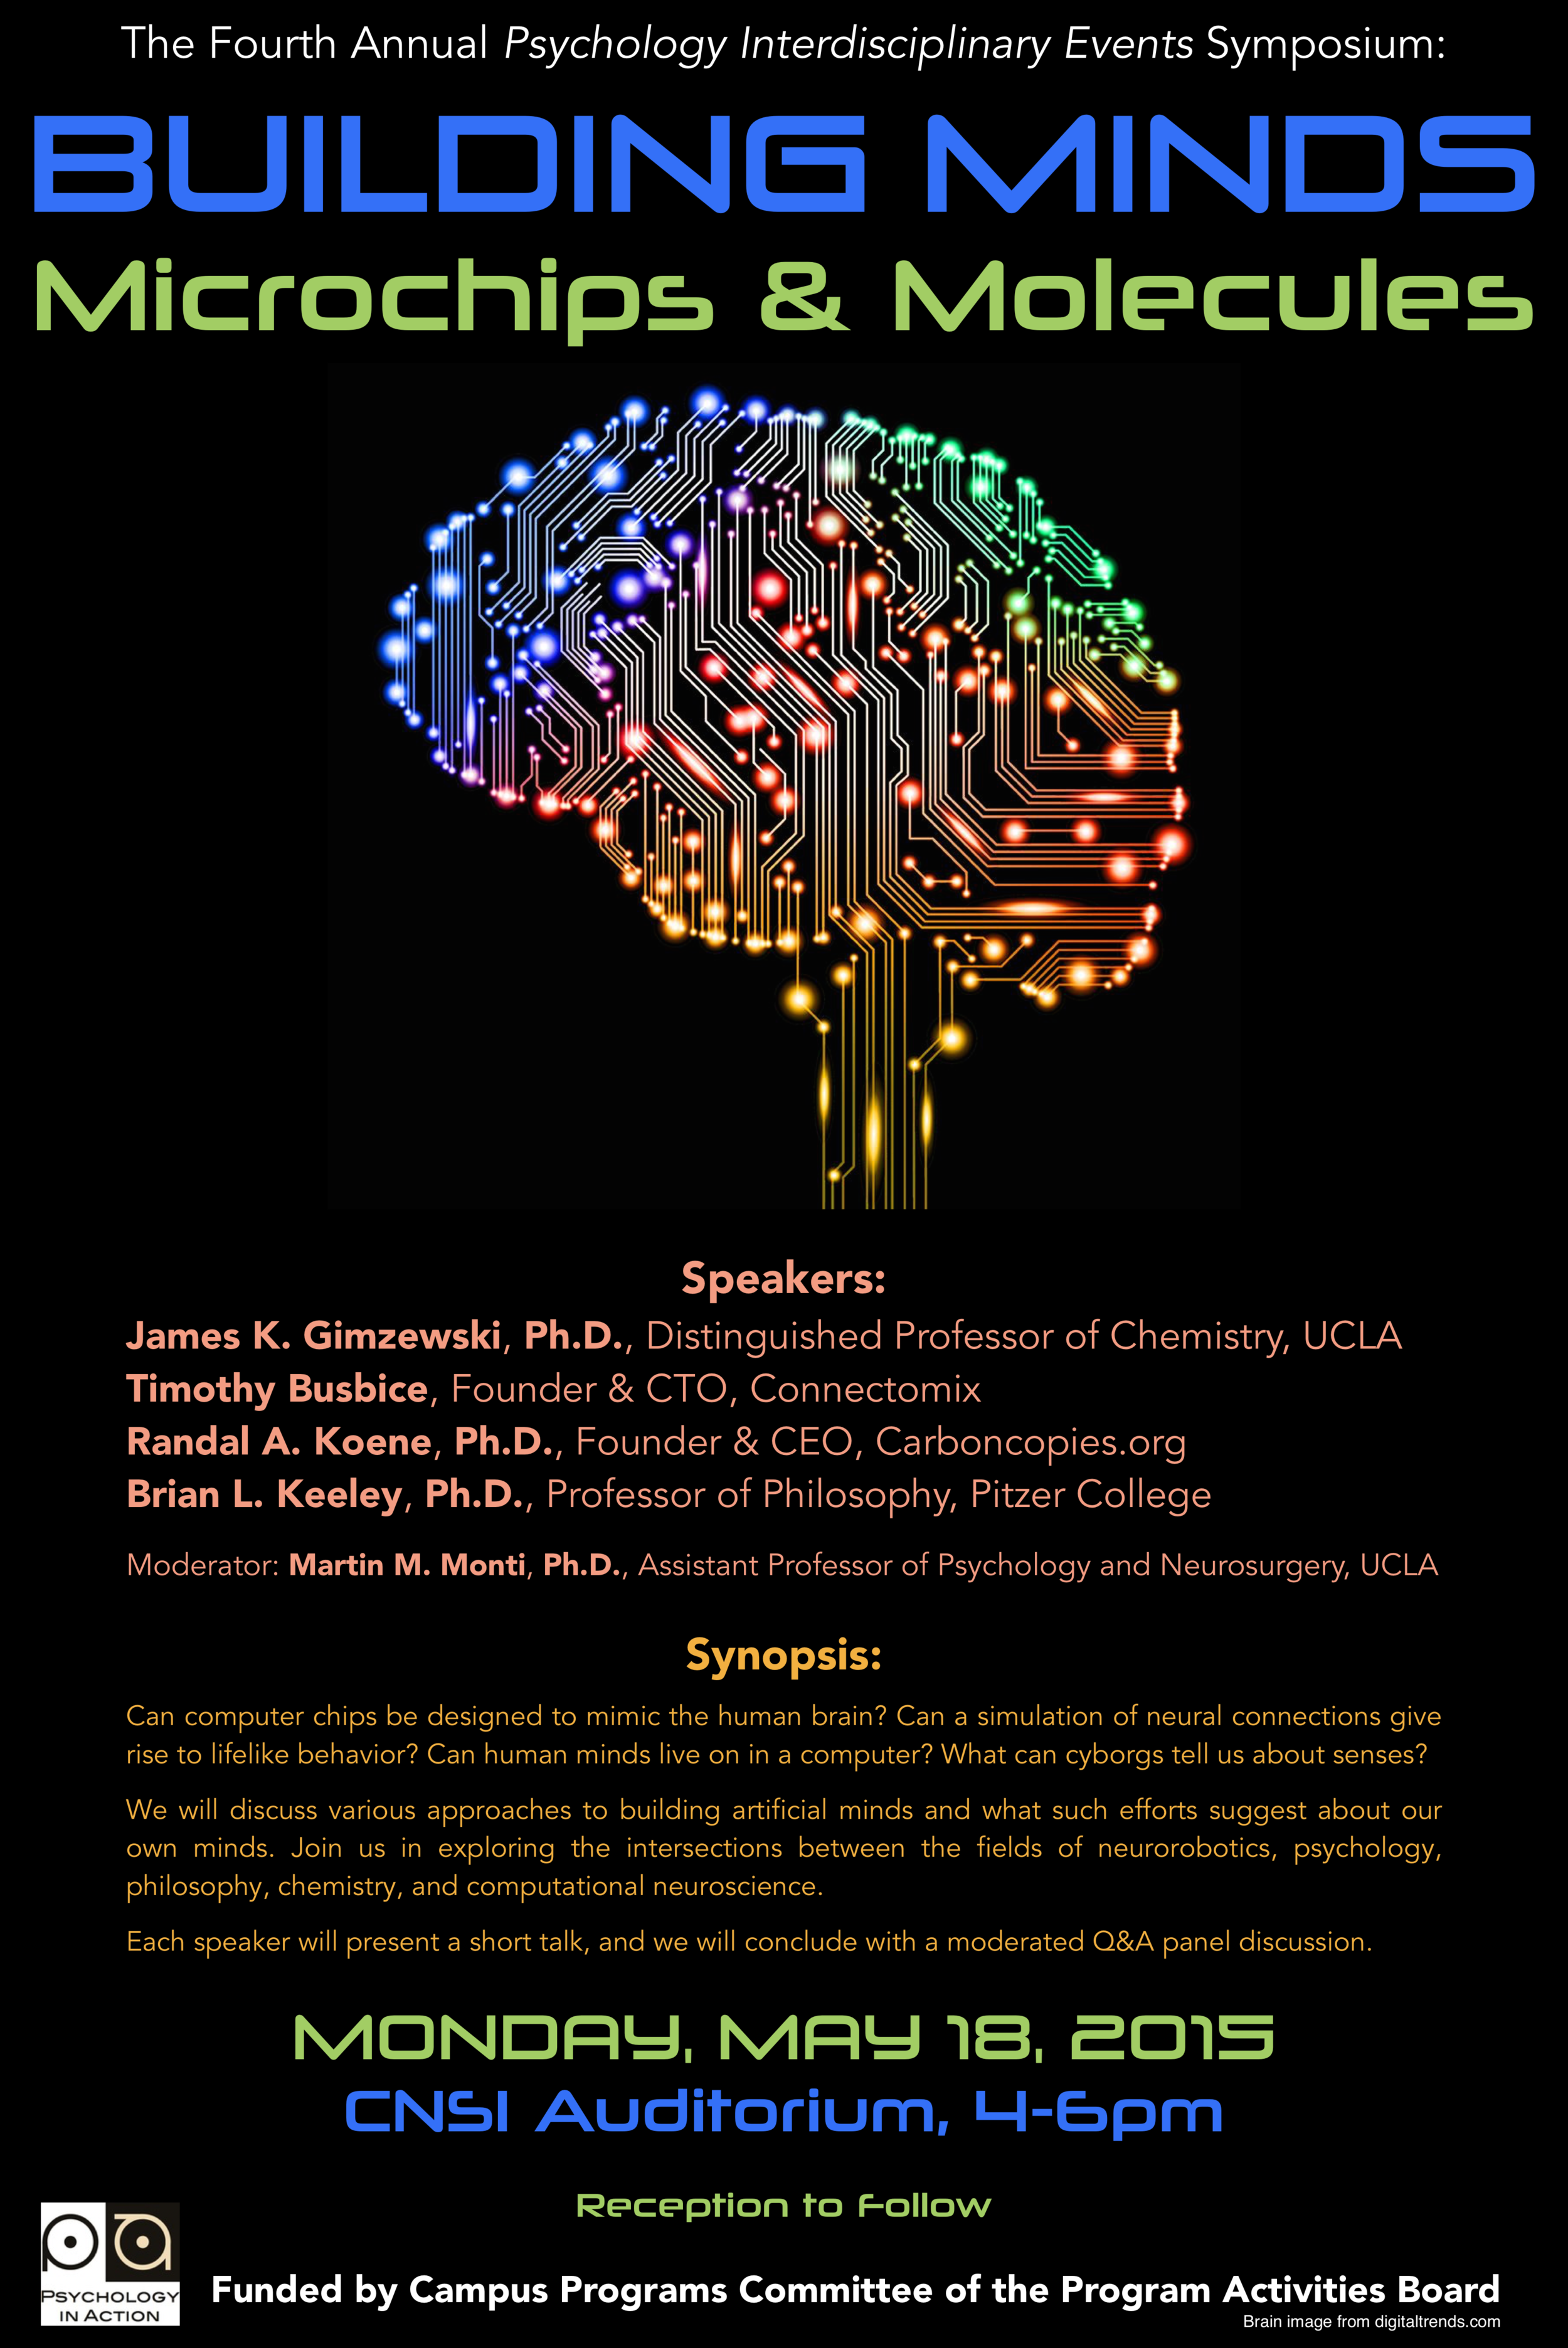 “Building Minds: Microchips & Molecules” Symposium – May 18, 2015